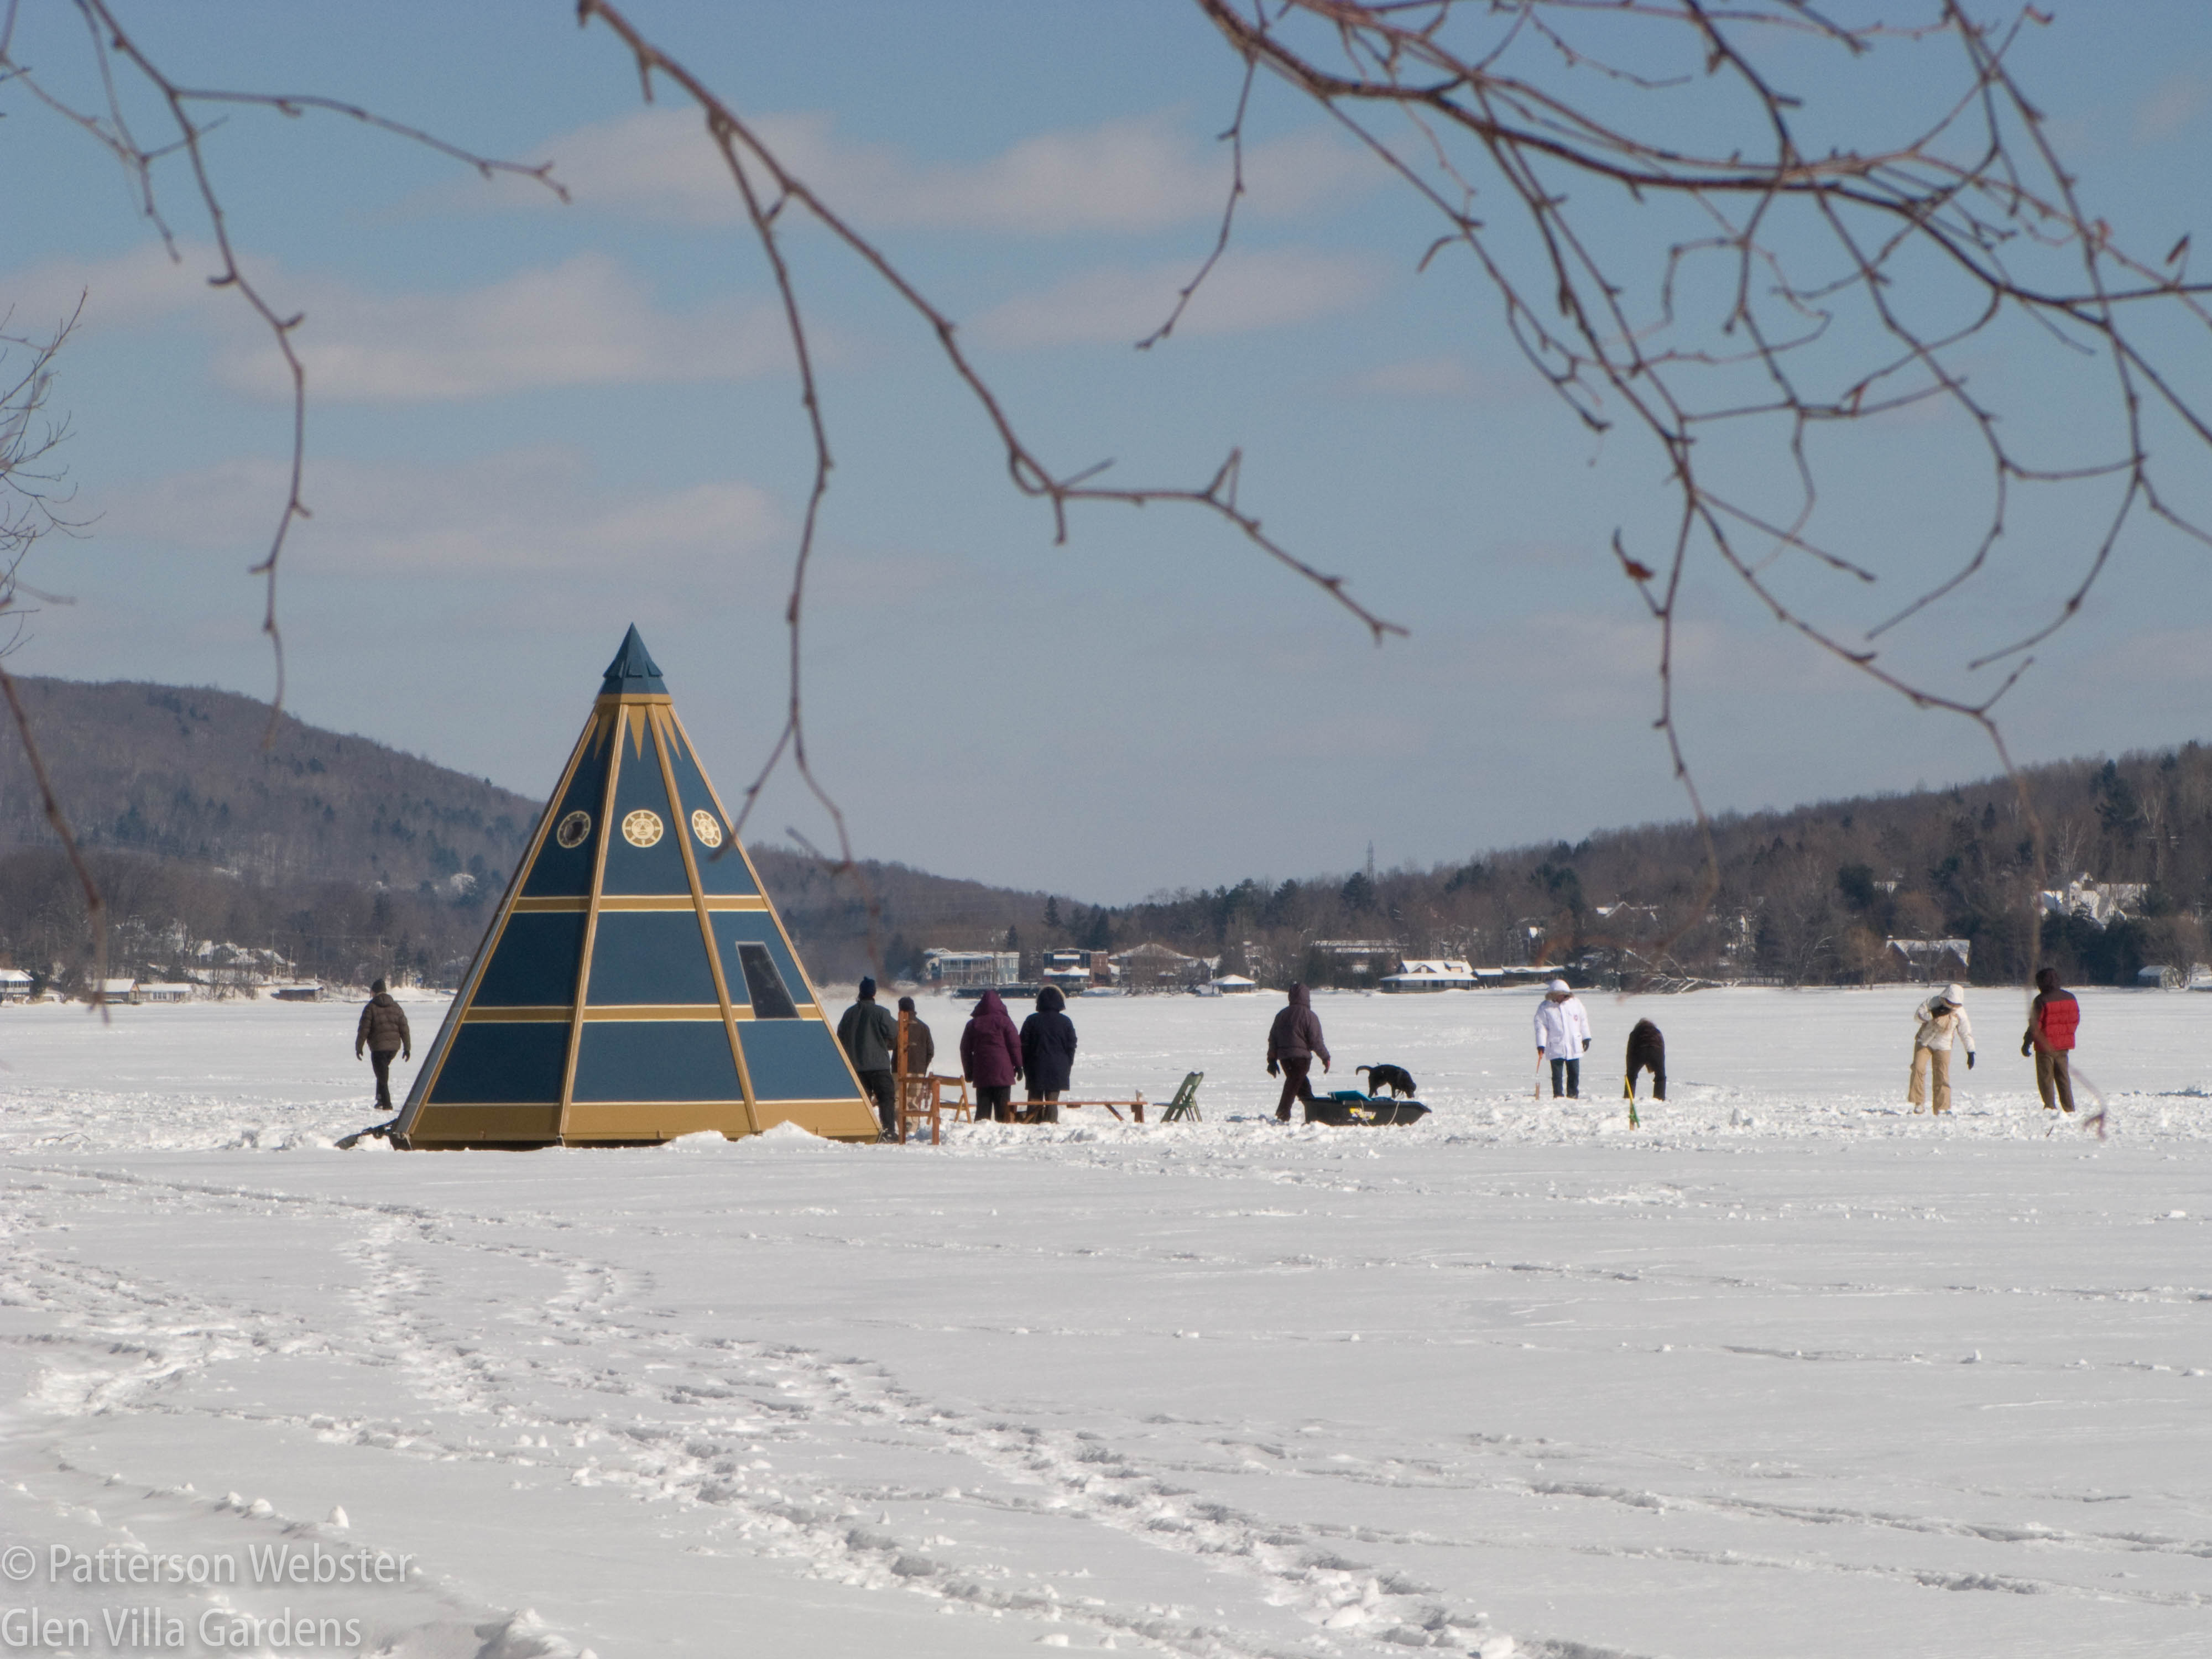 This photo from 2008 shows the yurt on the ice.